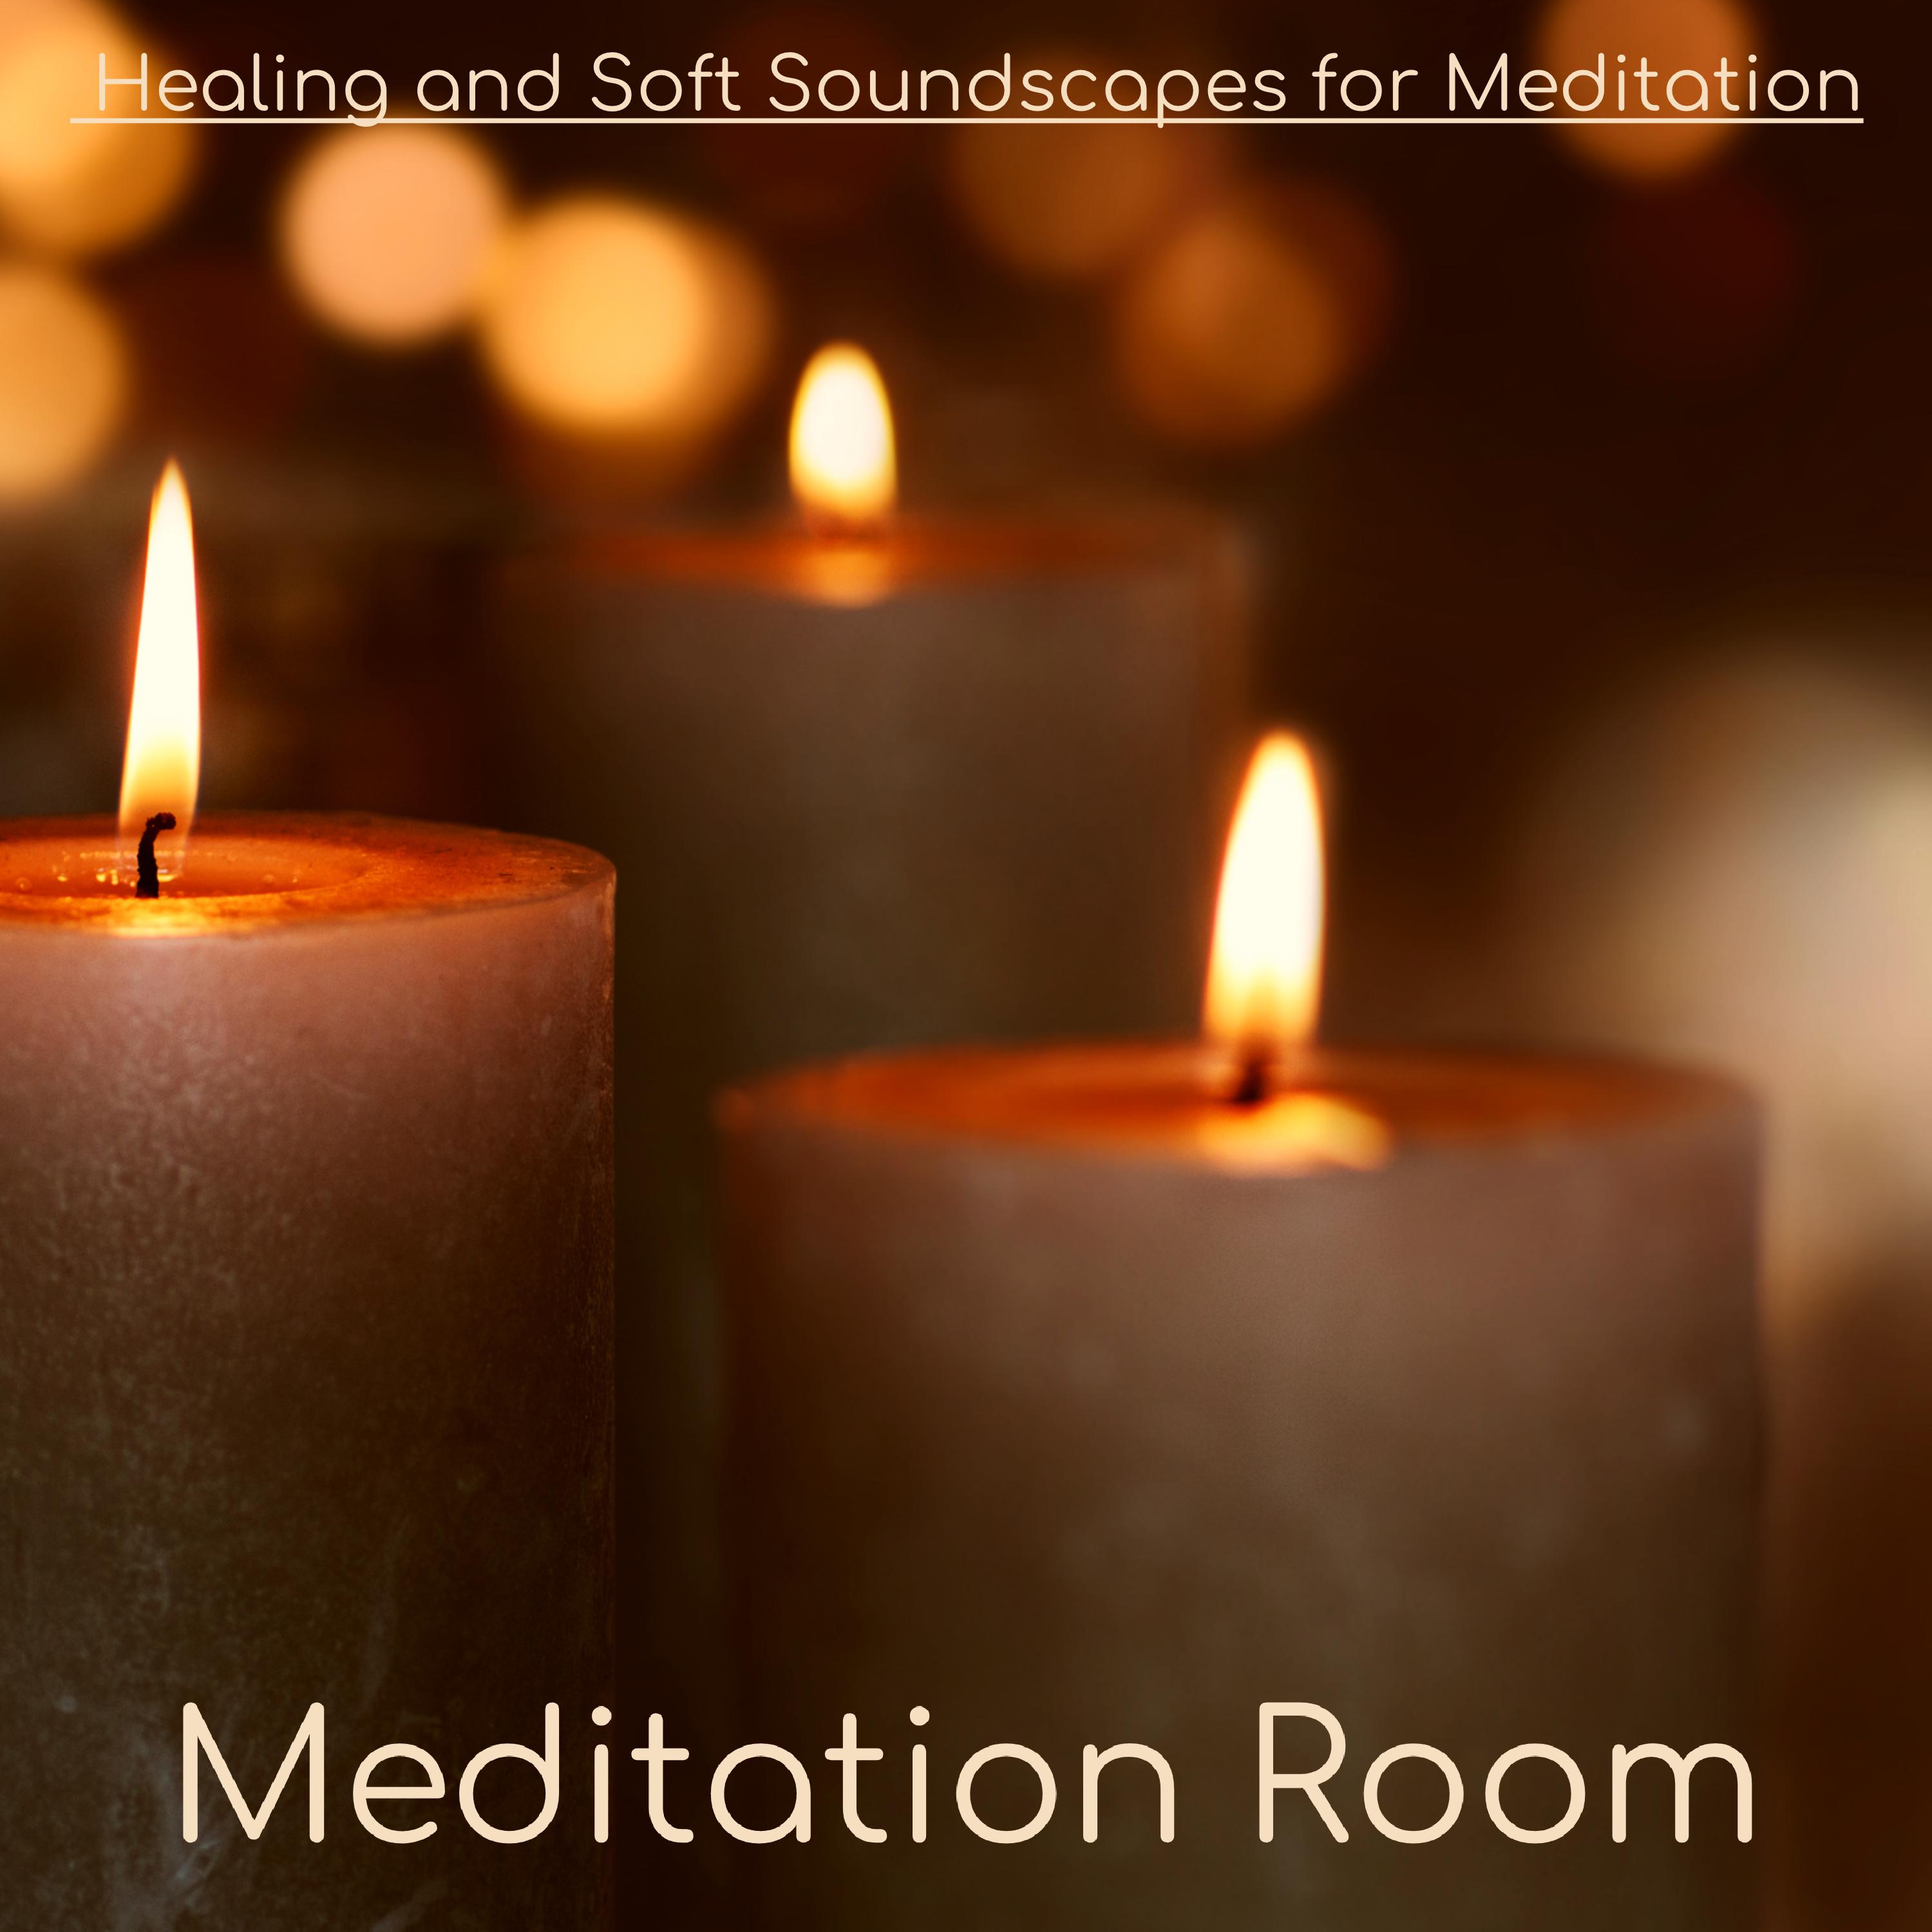 Healing and Soft Soundscapes